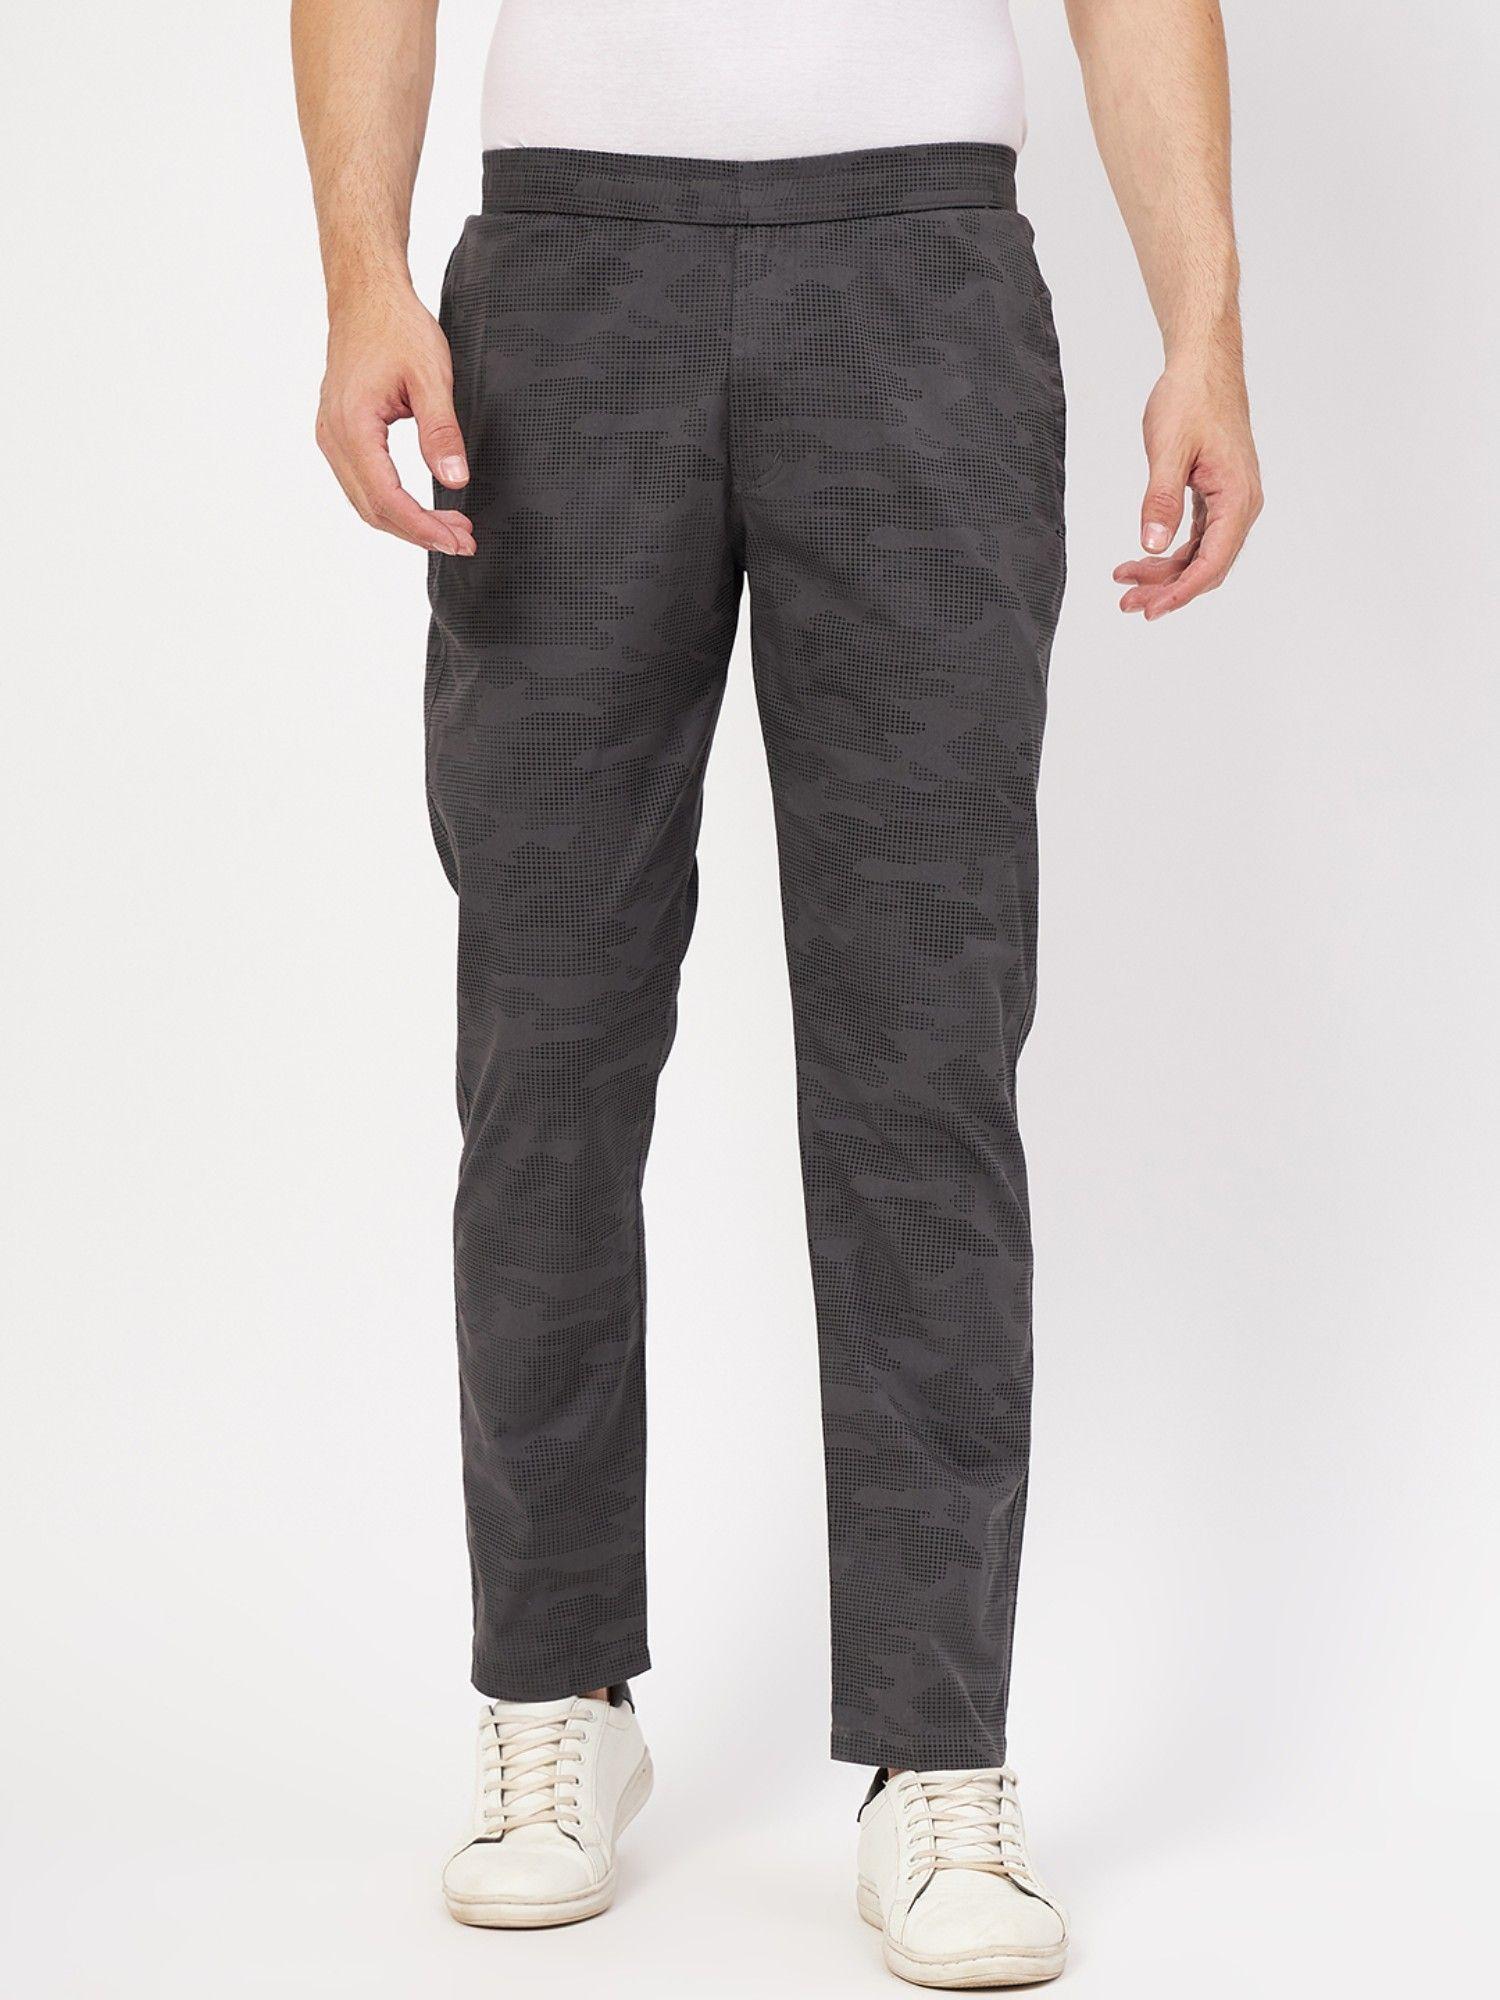 mens charcoal camouflage track pant